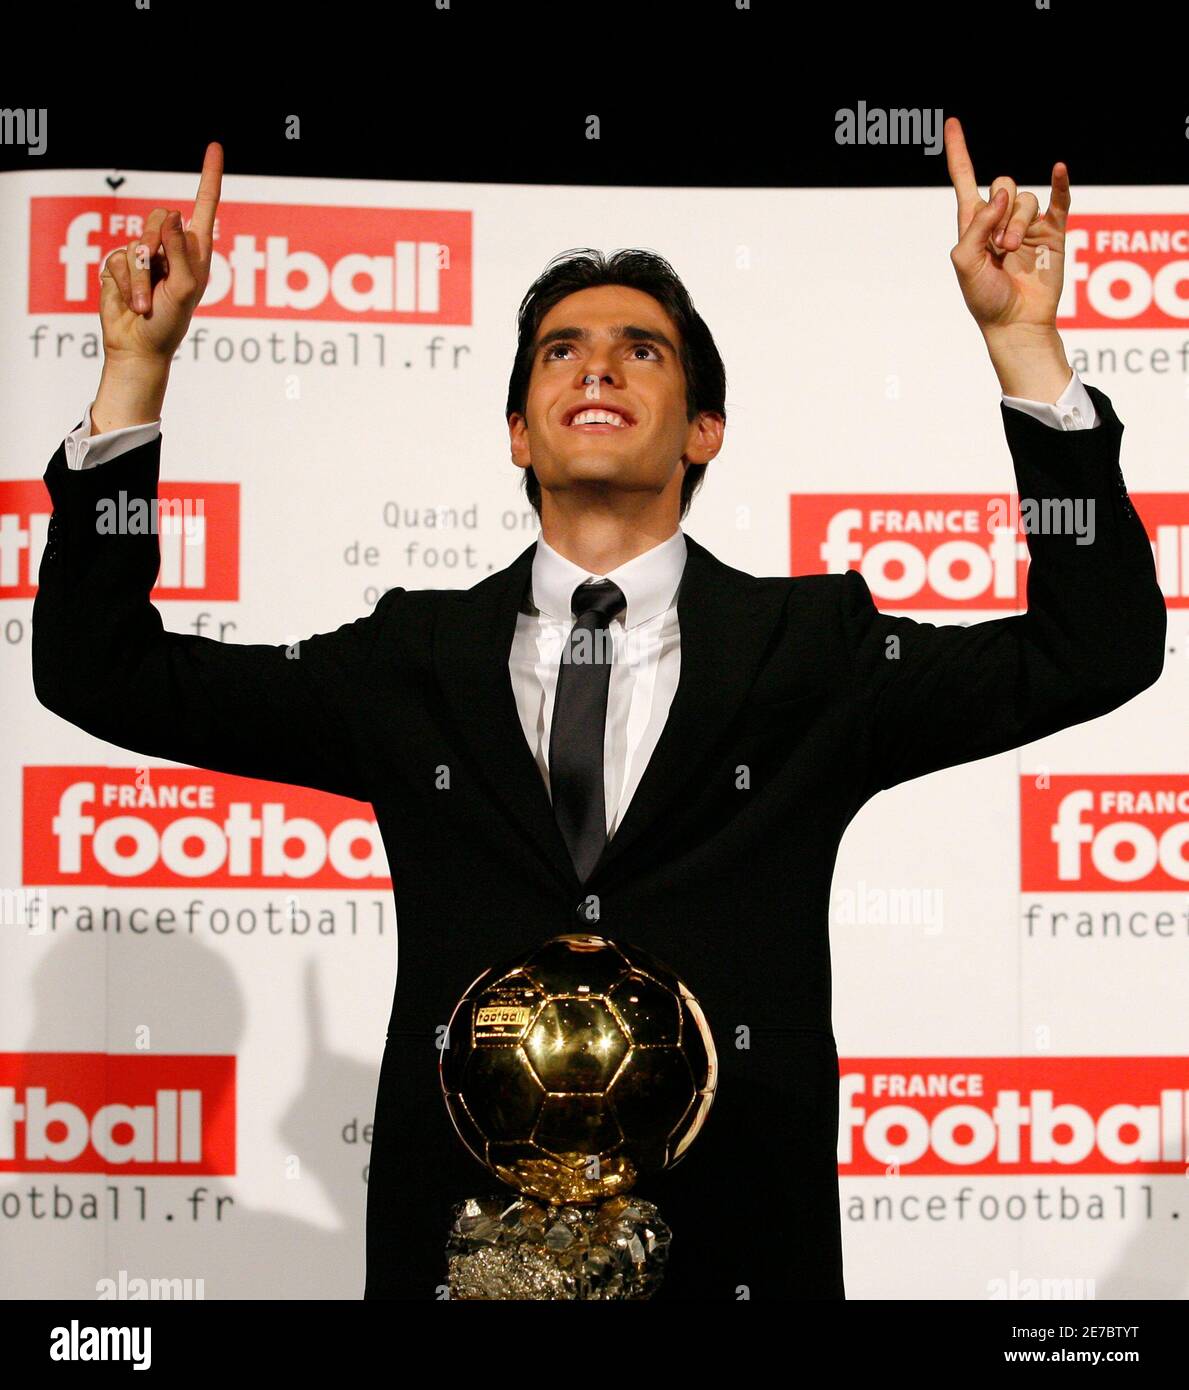 AC Milan and Brazil playmaker Kaka was awarded the 2007 Ballon d'Or by  French magazine France Football, in Paris December 2, 2007. Kaka is already  the winner of the FIFPro world Player